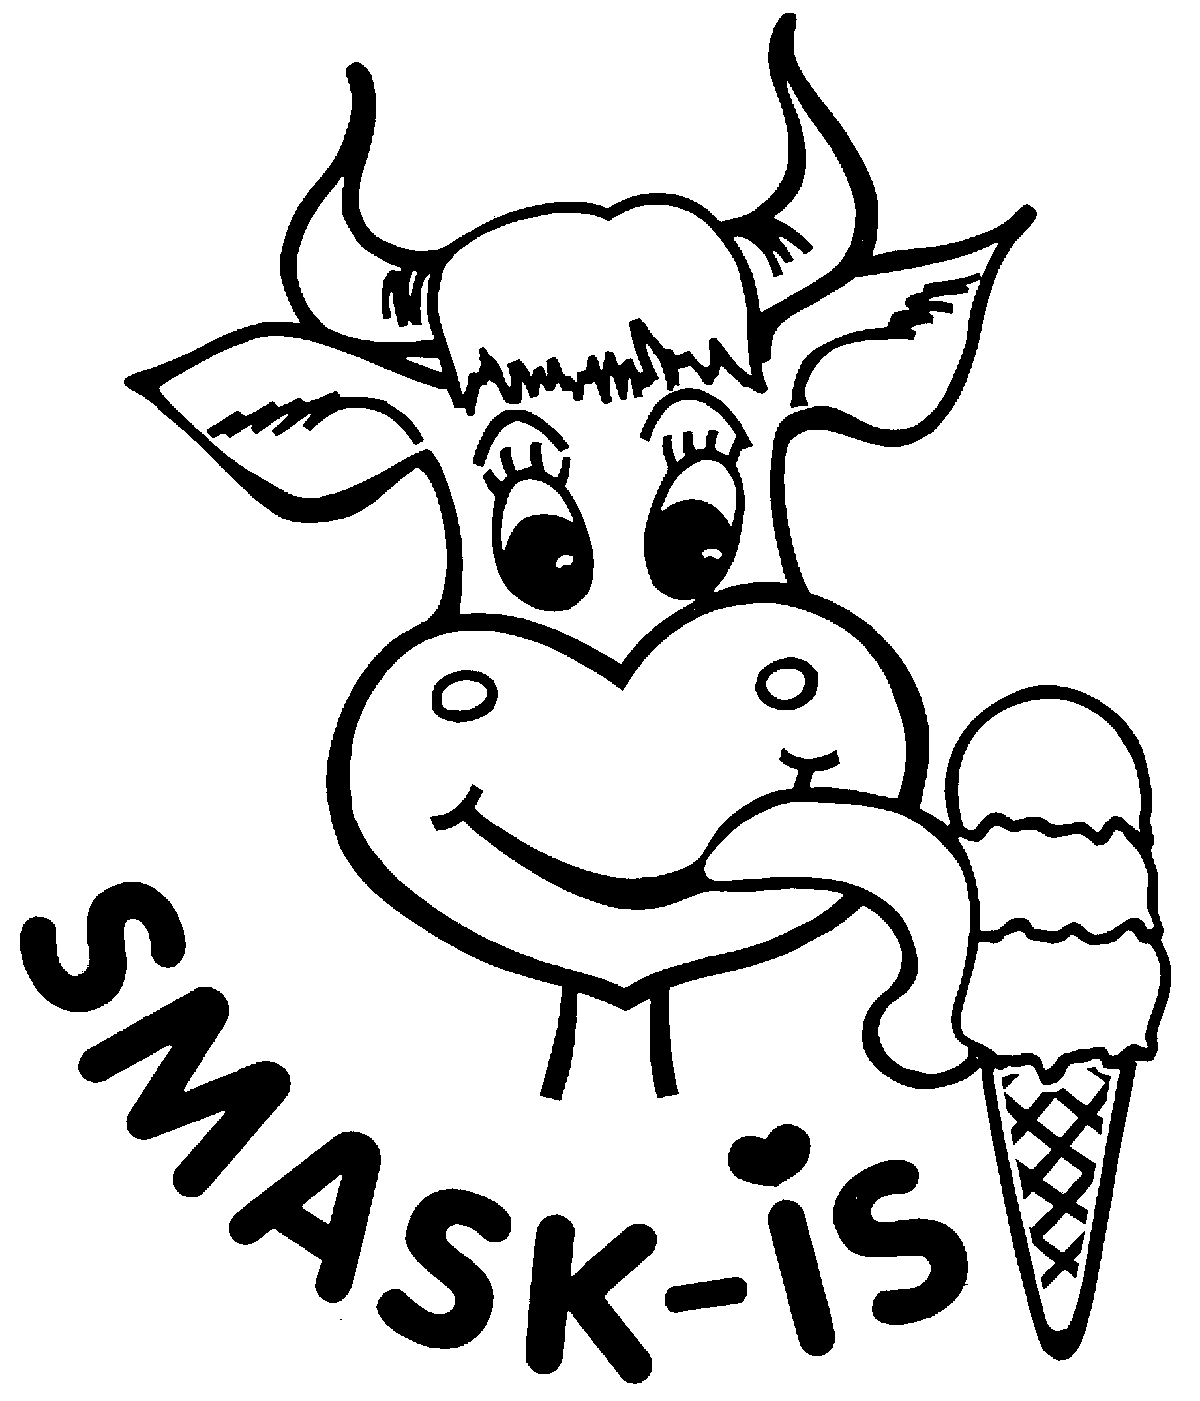 Smask-is